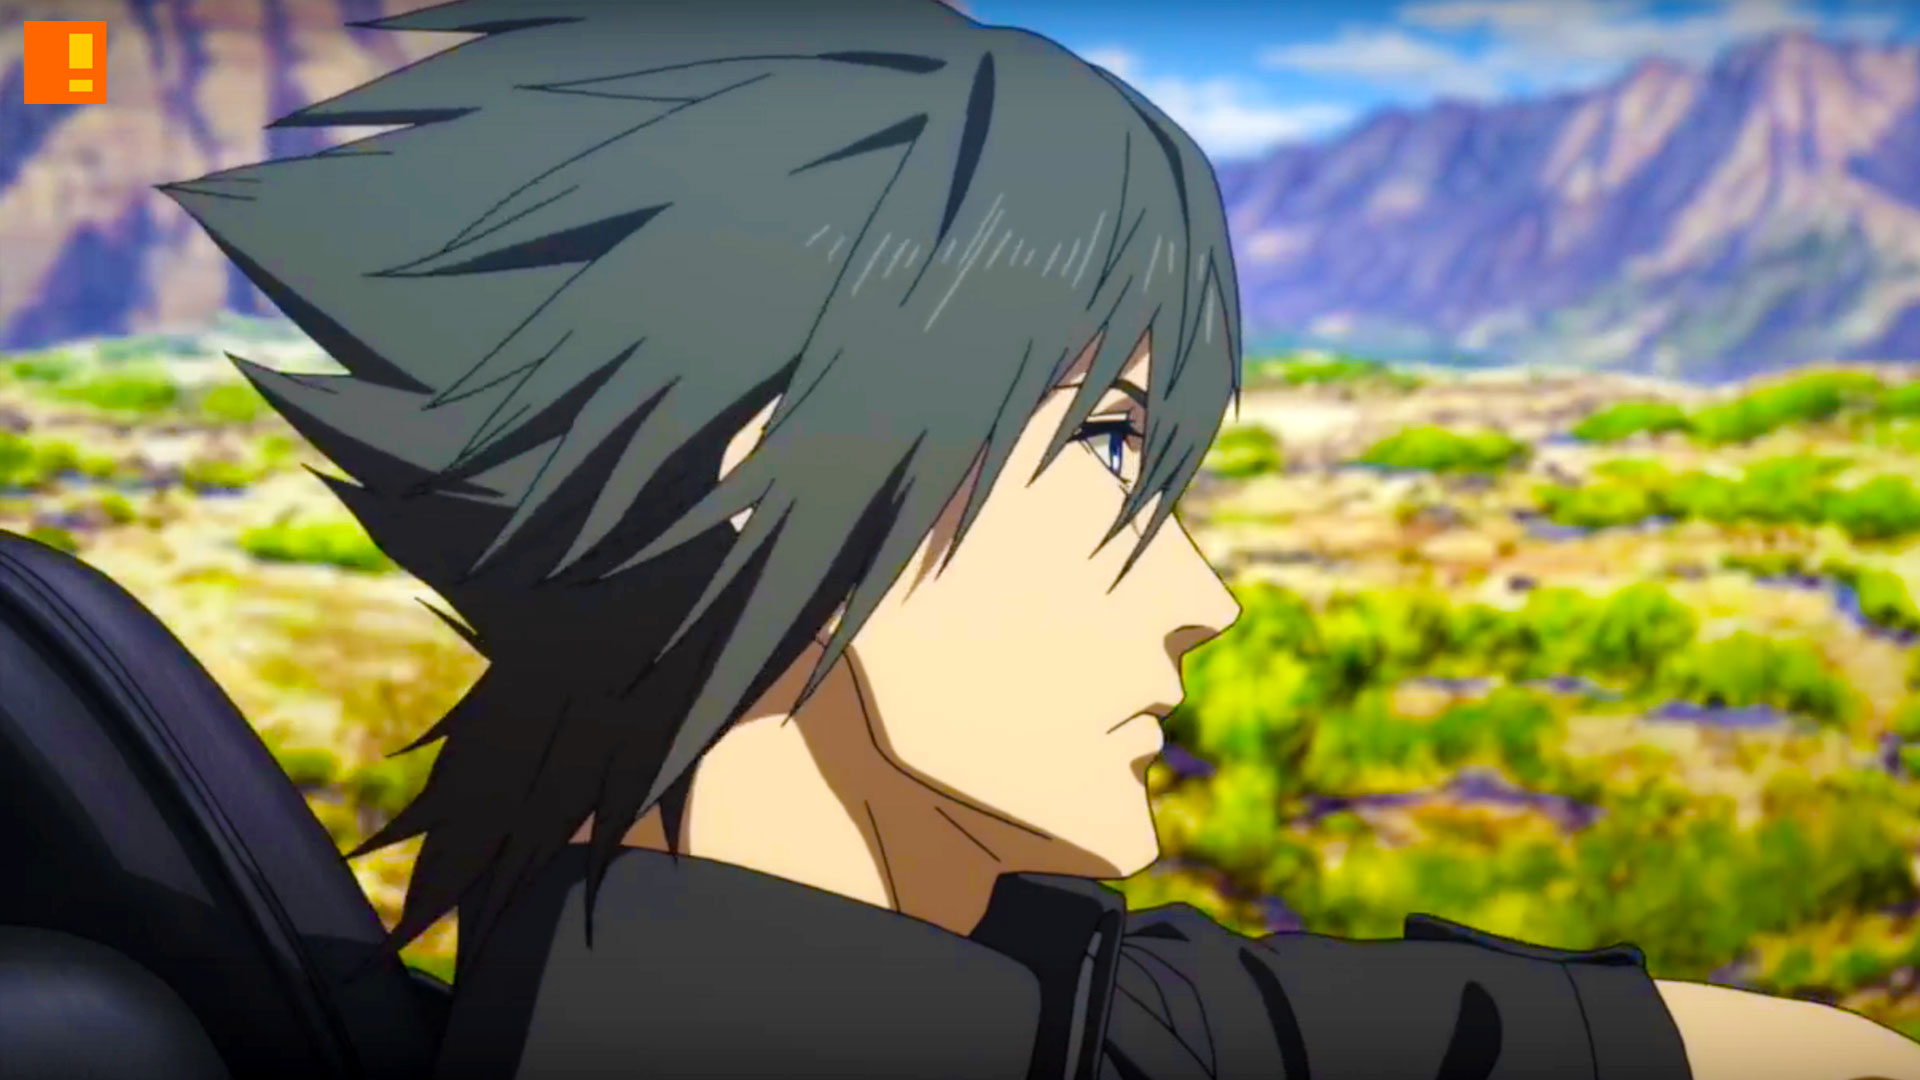 Brotherhood Final Fantasy XV” anime miniseries release first of five  episodes online – The Action Pixel